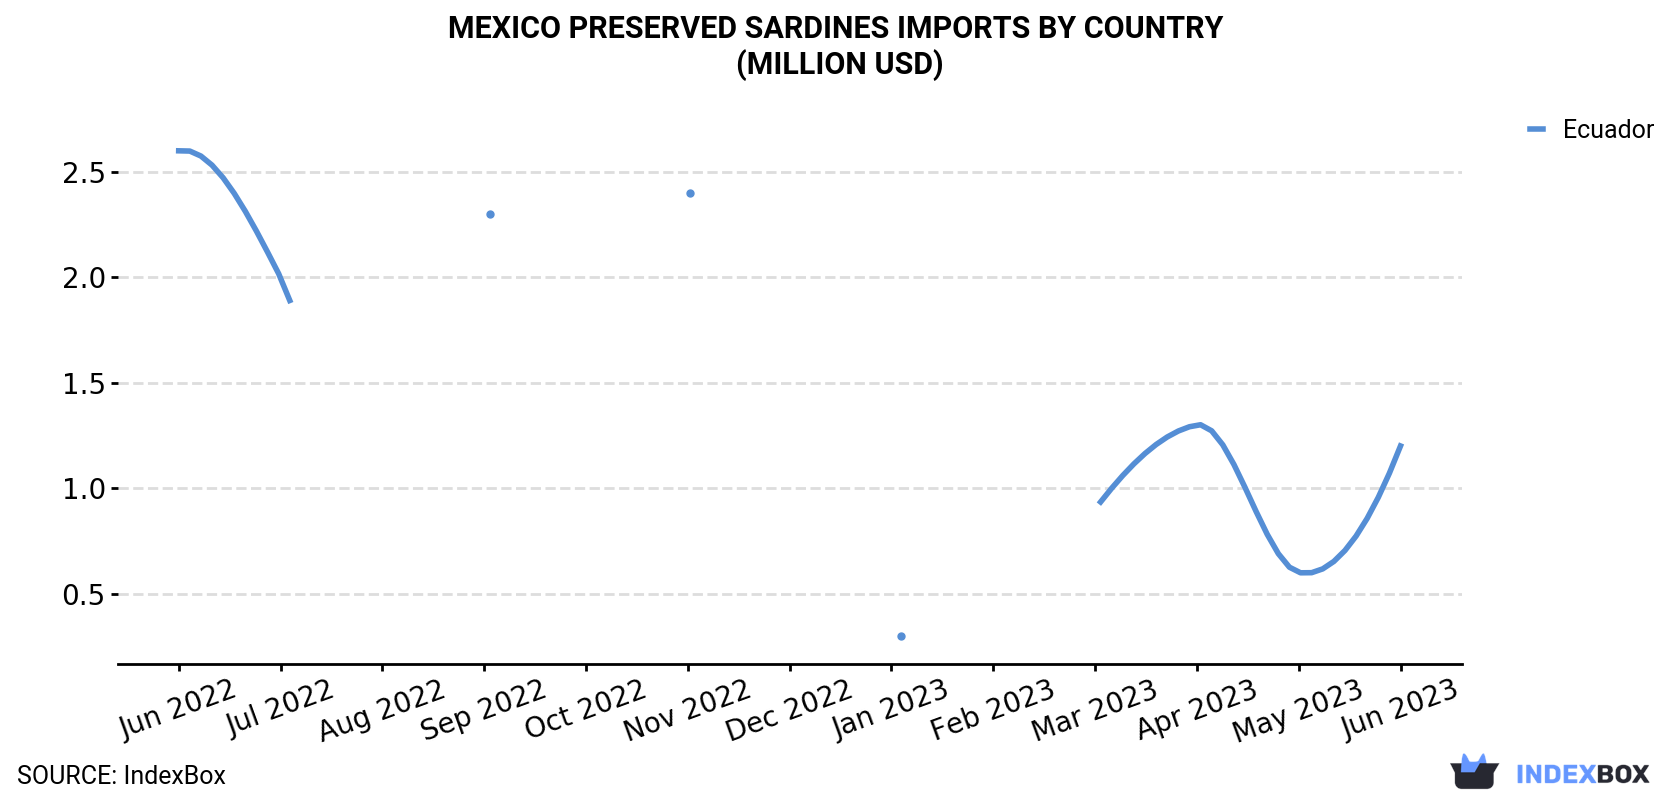 Mexico Preserved Sardines Imports By Country (Million USD)